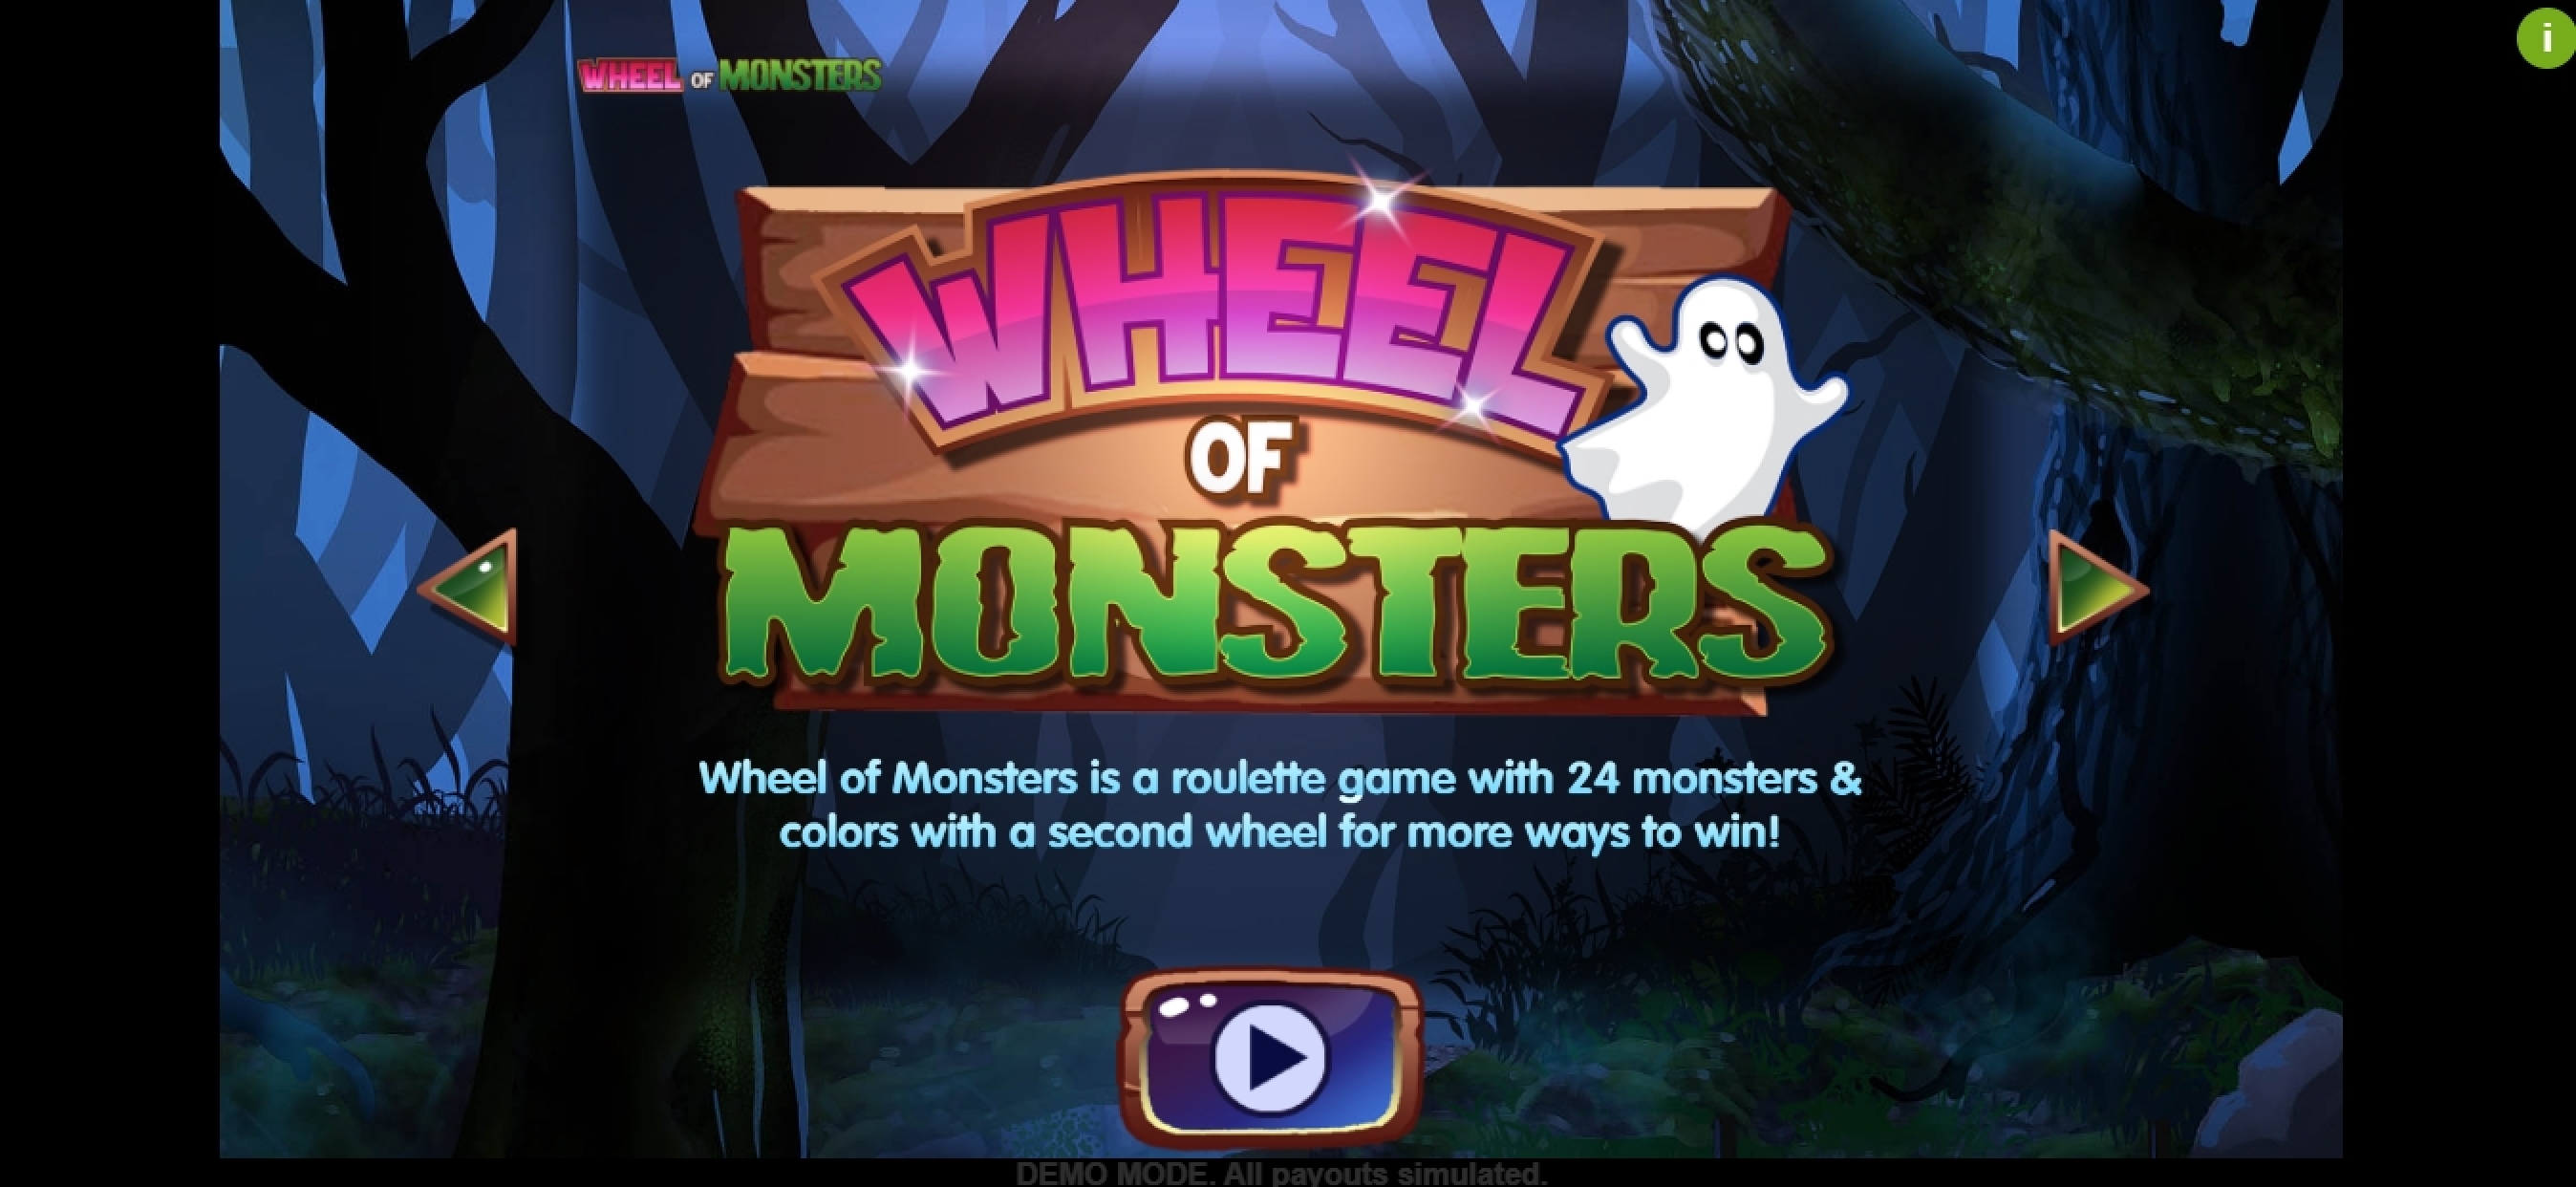 Play Wheel of Monsters Free Casino Slot Game by Asylum Labs